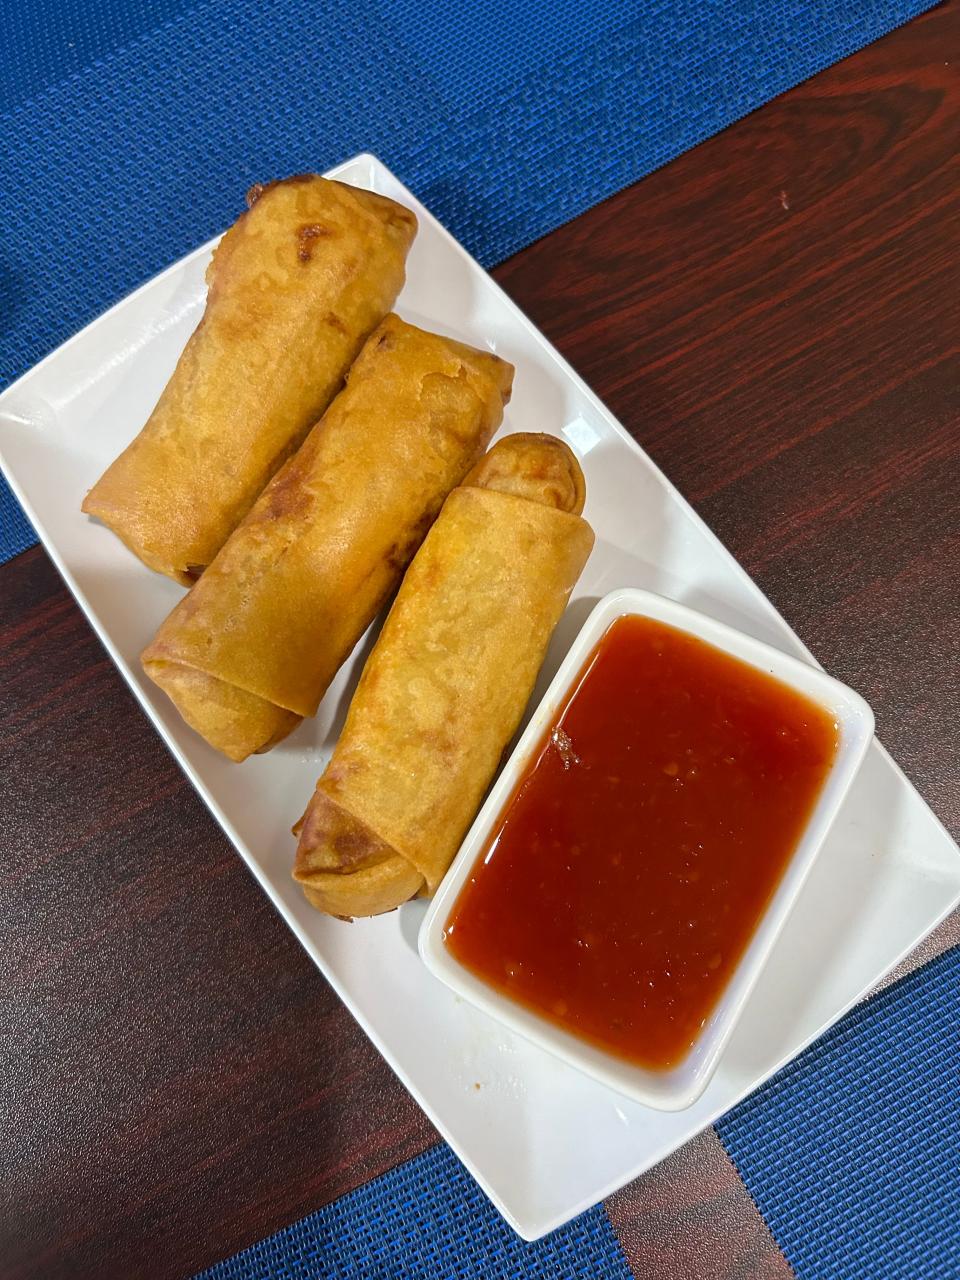 Spring rolls at Lyeh Thai restaurant in Akron are made with potato, cabbage and shredded carrots and served with sweet chili sauce.